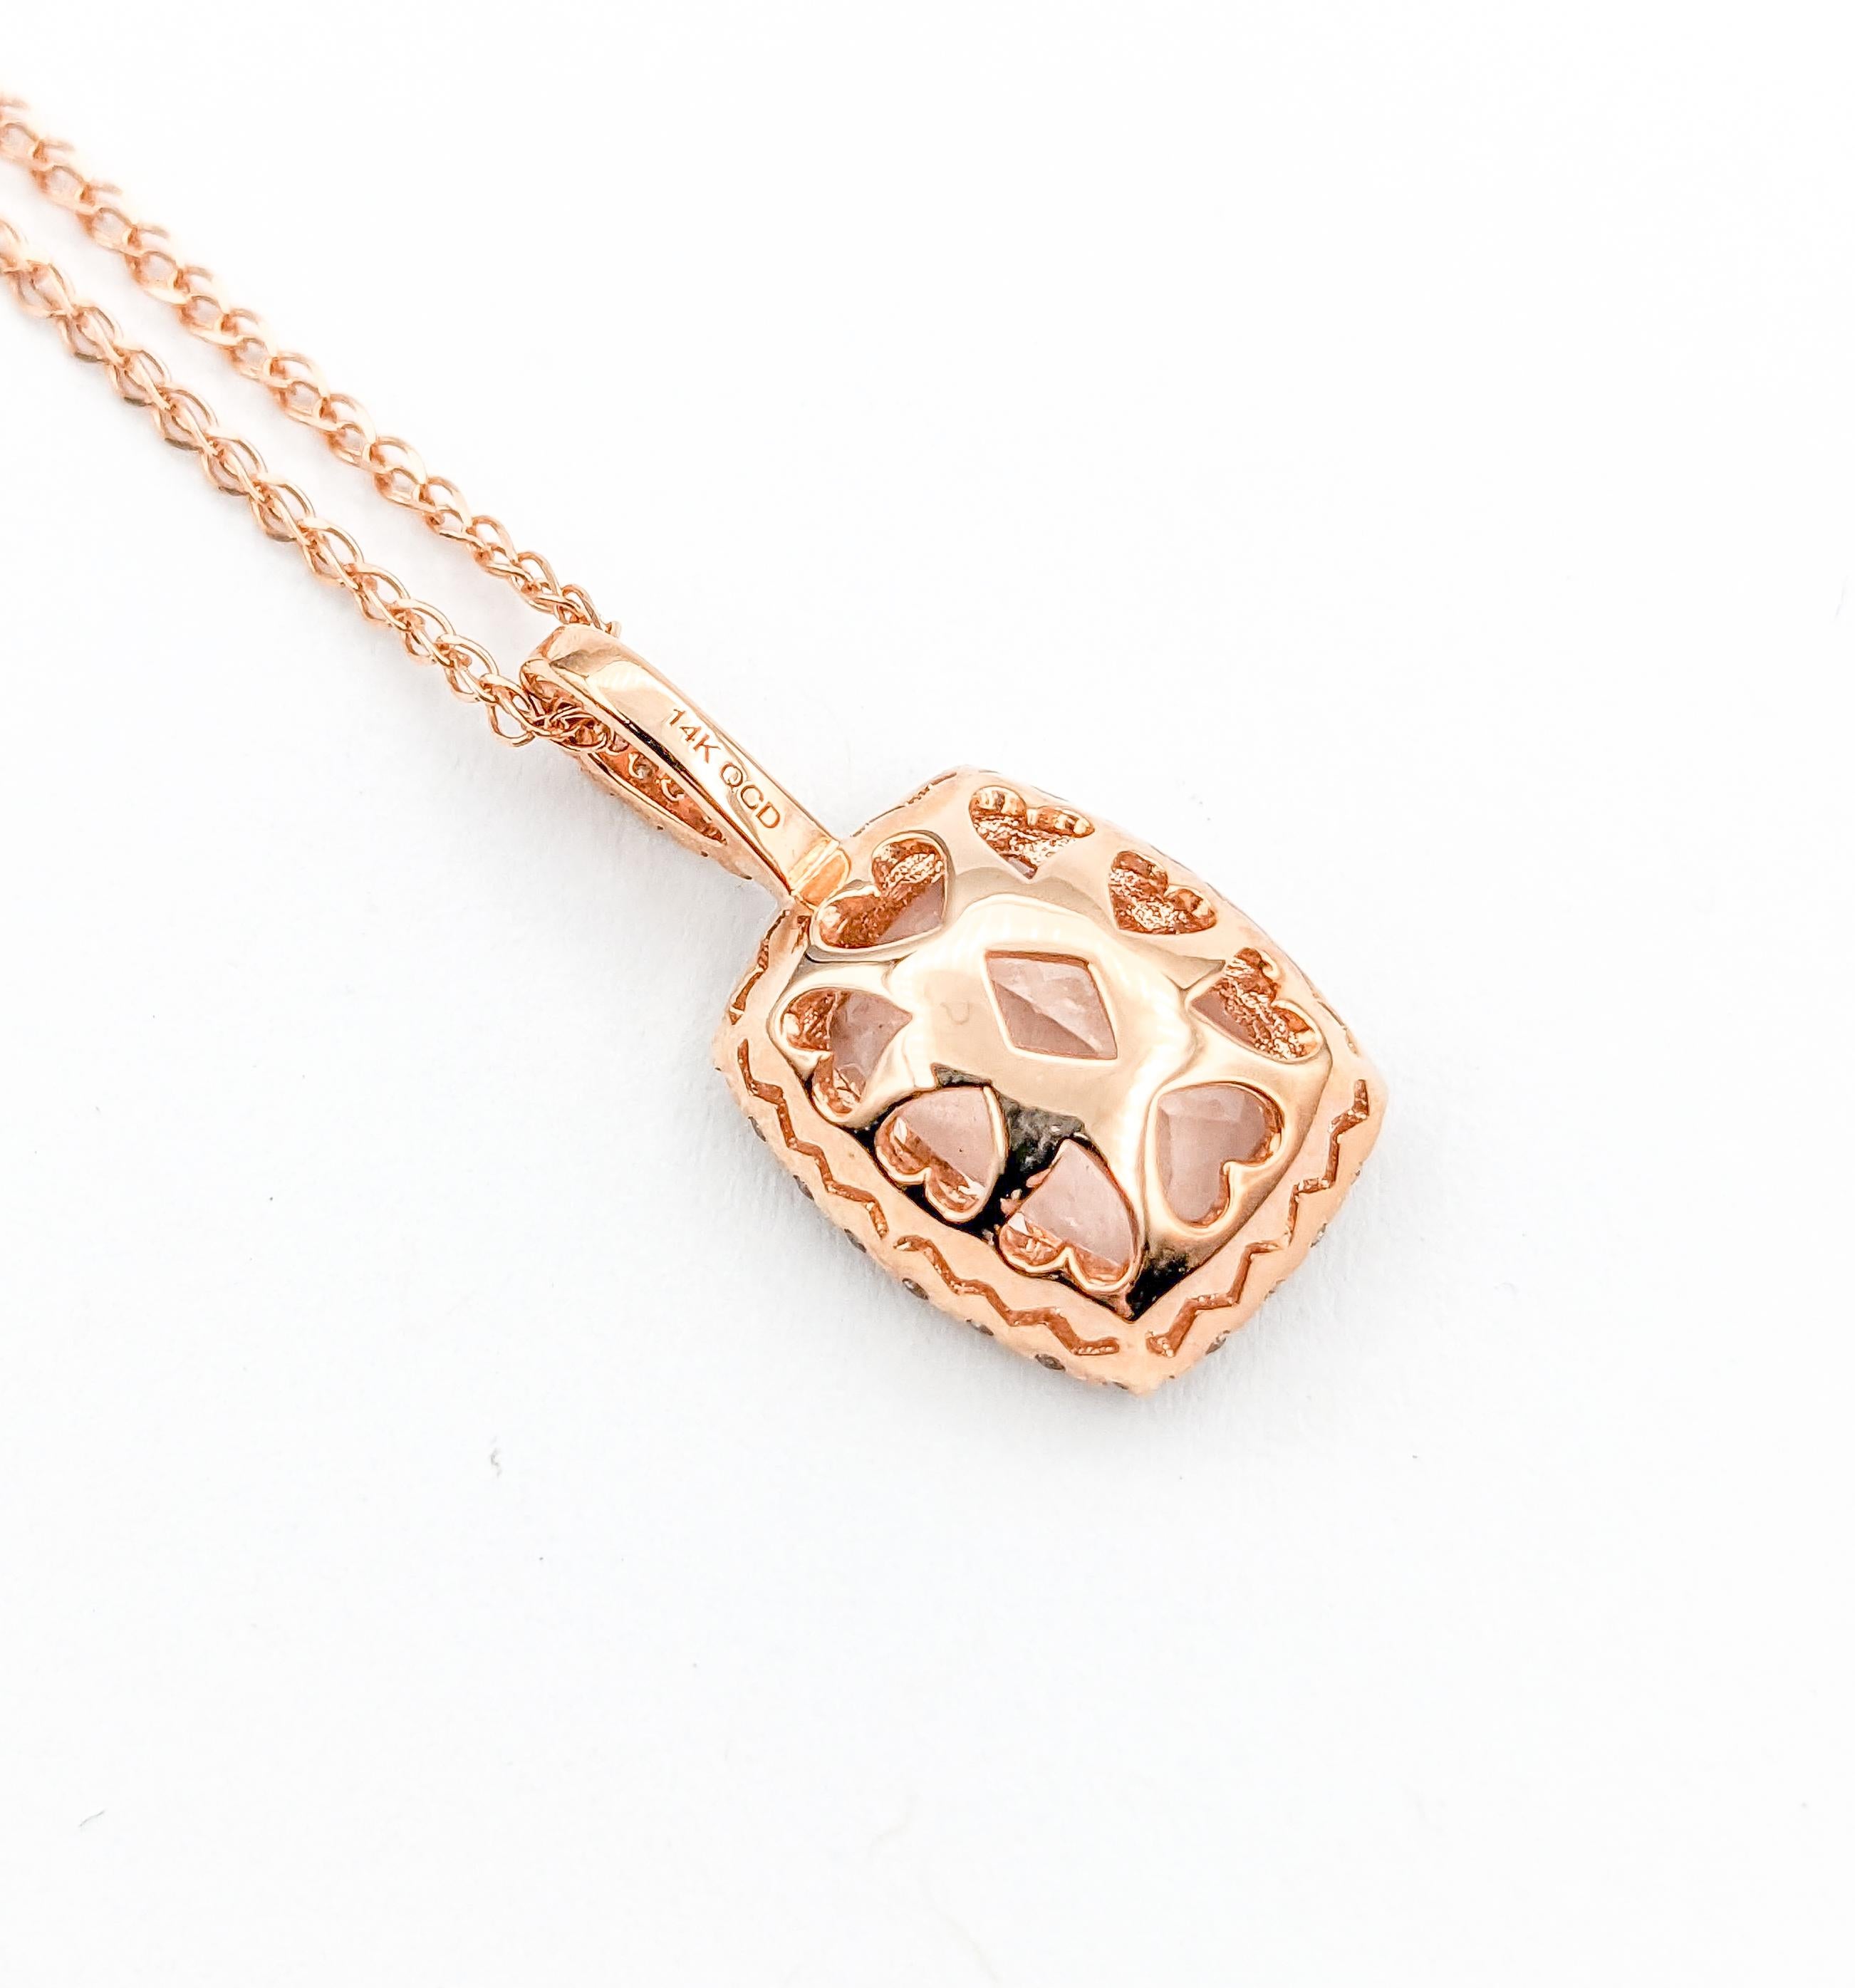 Cushion Cut 1.74ct Morganite & Diamond Pendant Necklace in Rose Gold For Sale